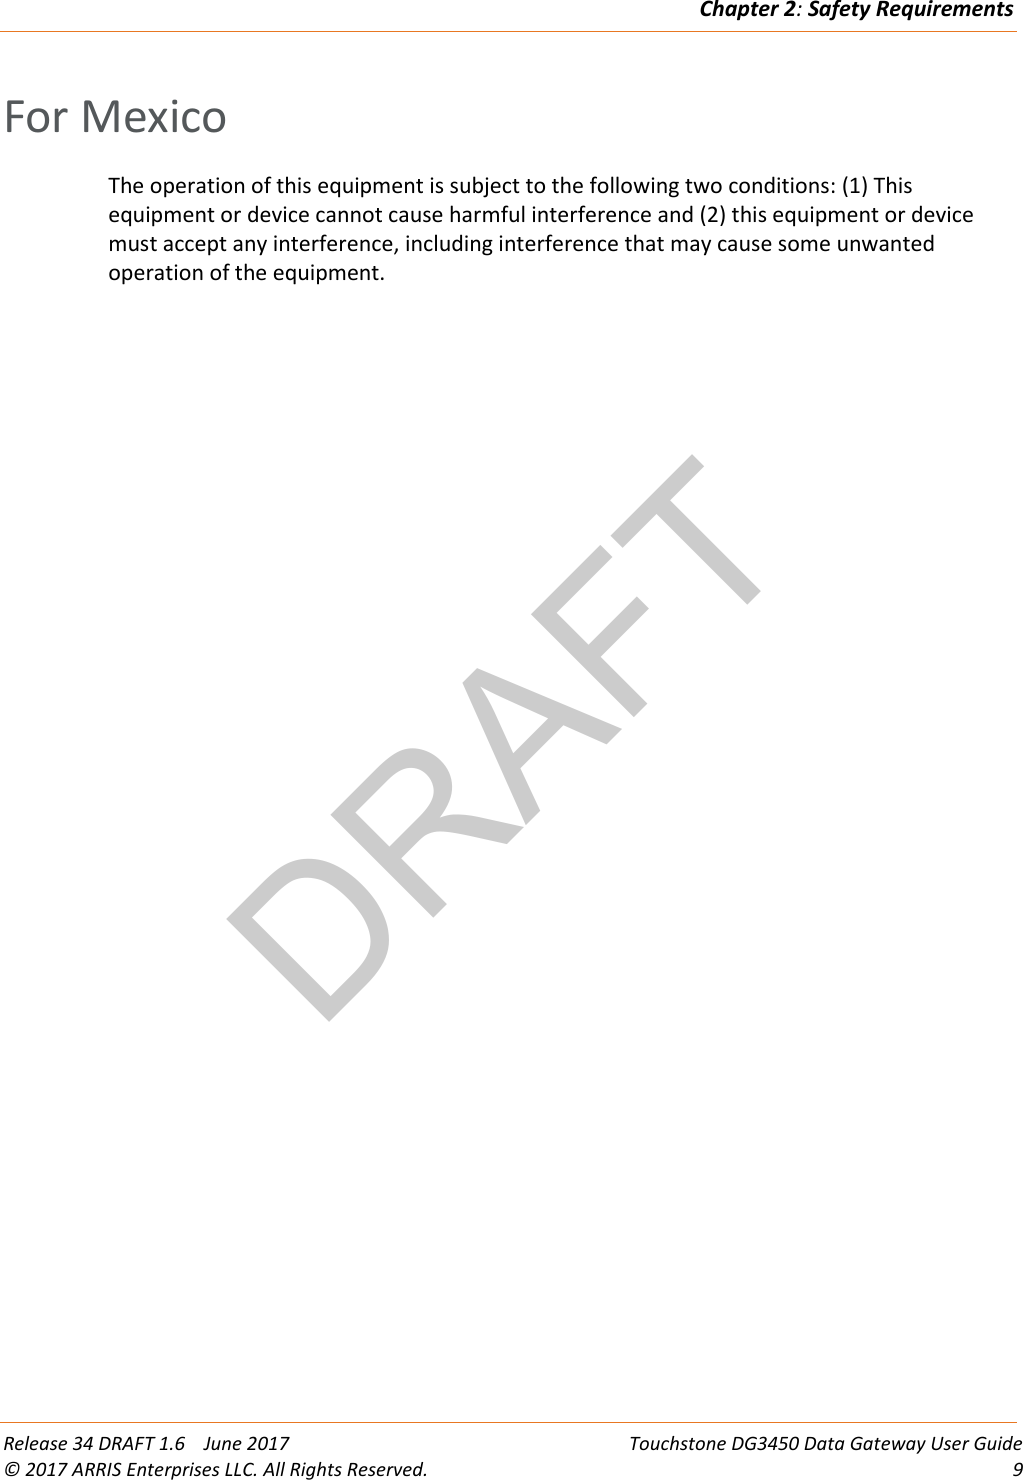 DRAFTChapter 2: Safety Requirements  Release 34 DRAFT 1.6    June 2017 Touchstone DG3450 Data Gateway User Guide © 2017 ARRIS Enterprises LLC. All Rights Reserved.  9  For Mexico The operation of this equipment is subject to the following two conditions: (1) This equipment or device cannot cause harmful interference and (2) this equipment or device must accept any interference, including interference that may cause some unwanted operation of the equipment.  